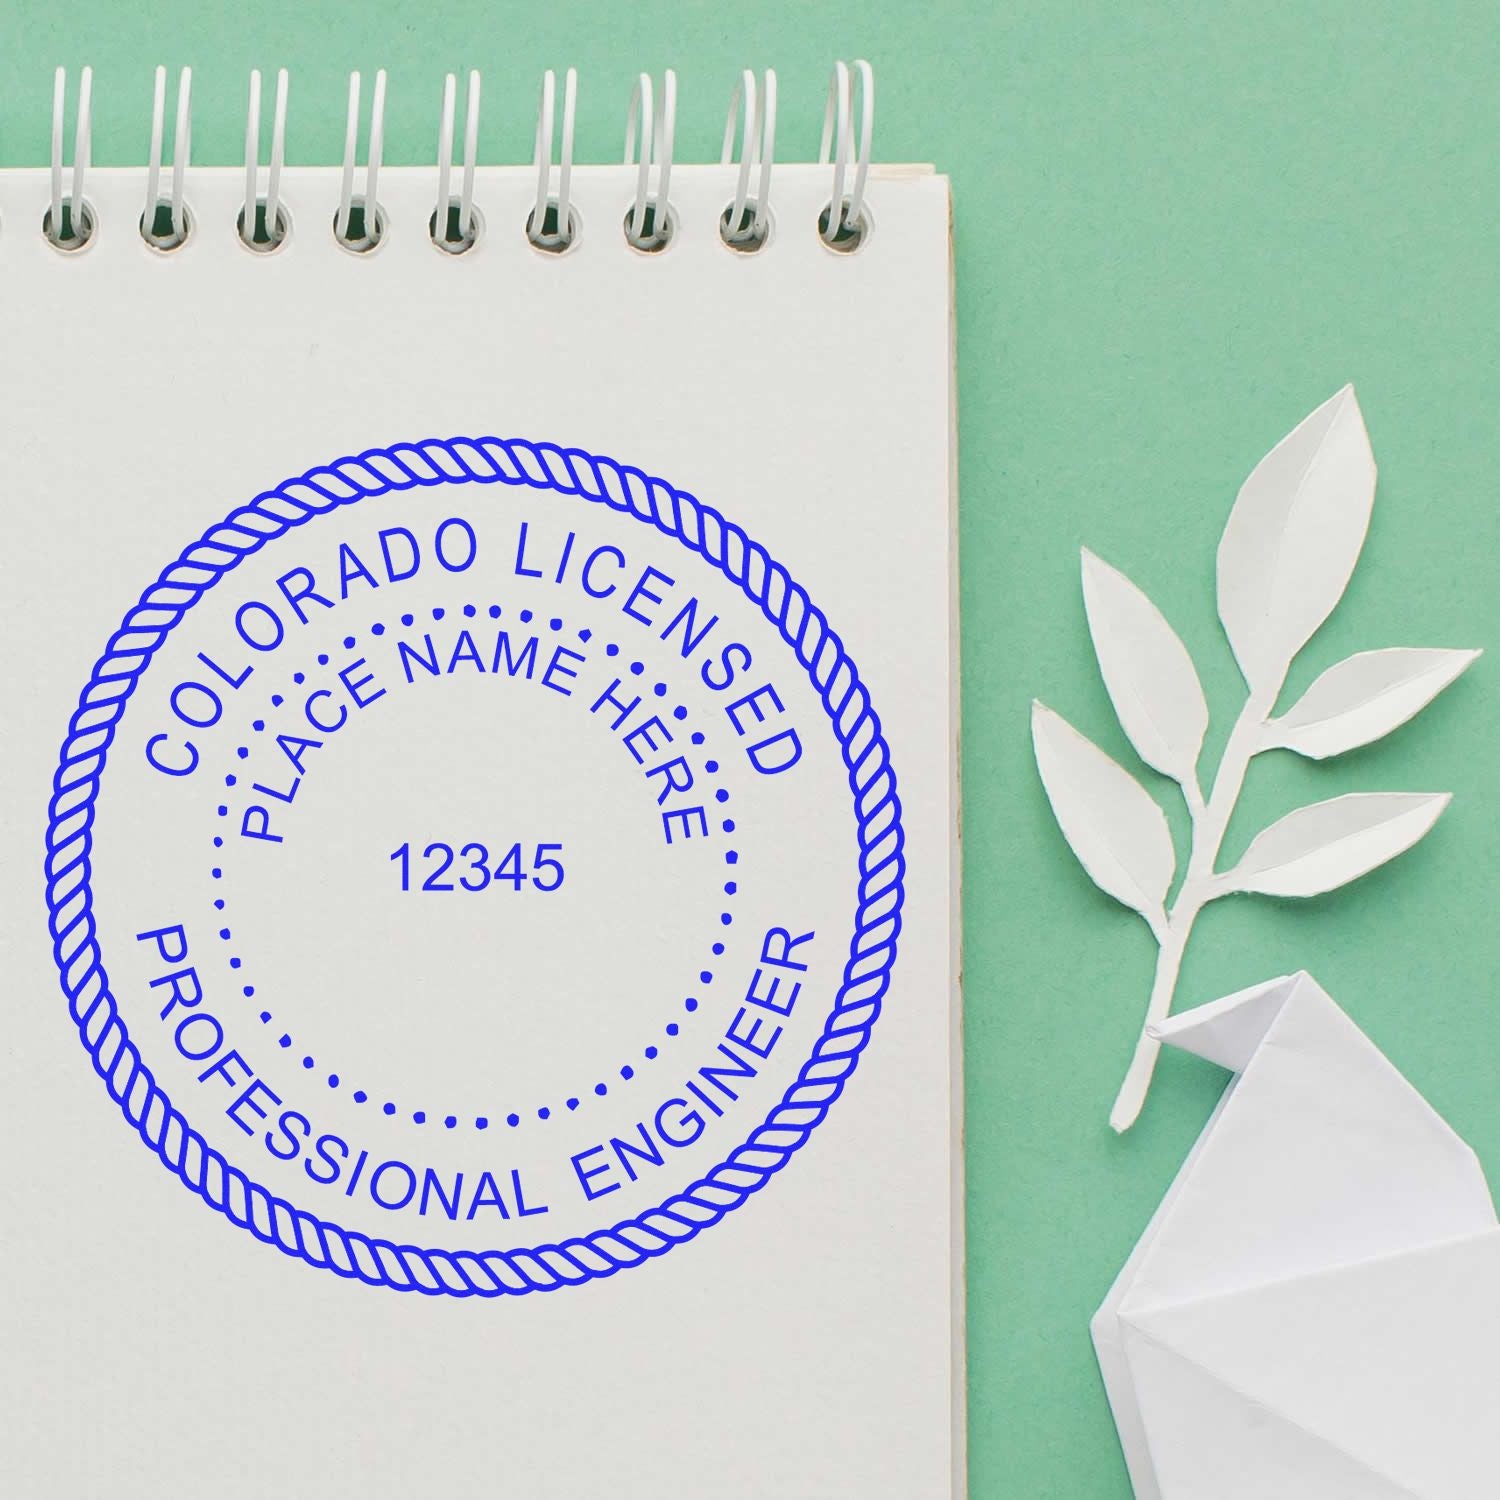 Colorado PE Stamp Guidelines Decoded: Ensuring Professional Excellence Feature Image